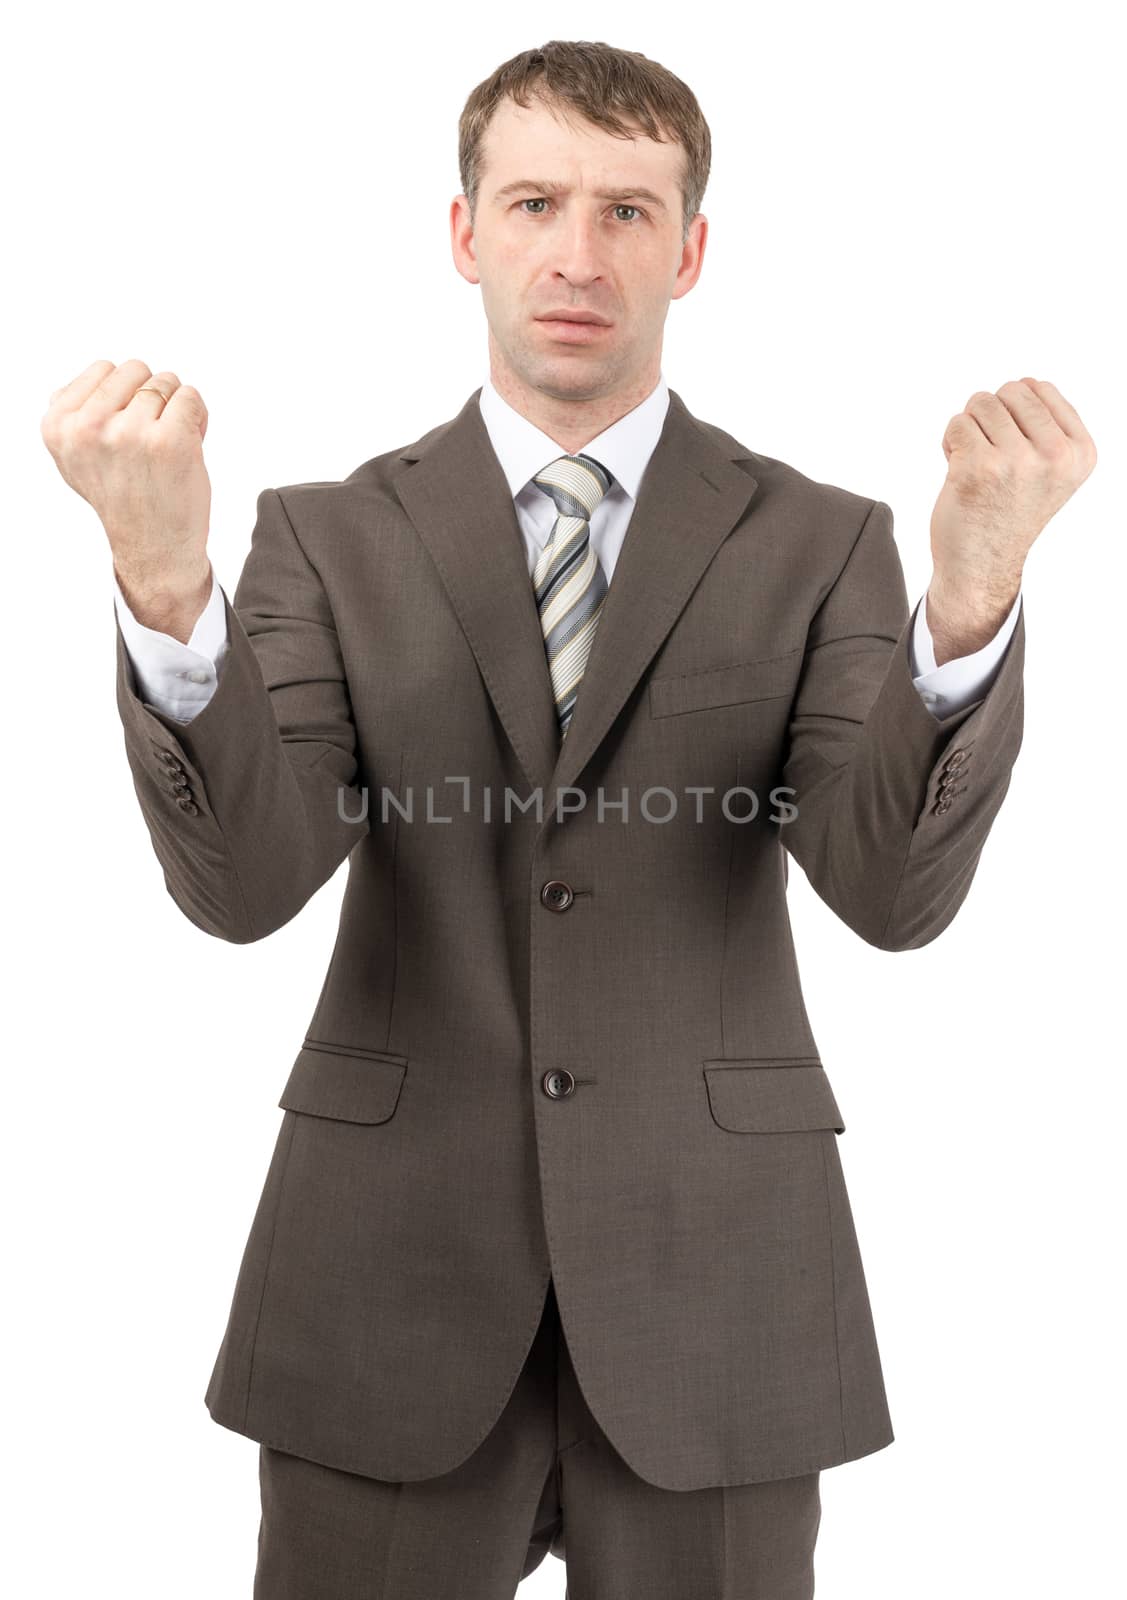 Unhappy businessman raised his hands up in front of him. Isolated on white background